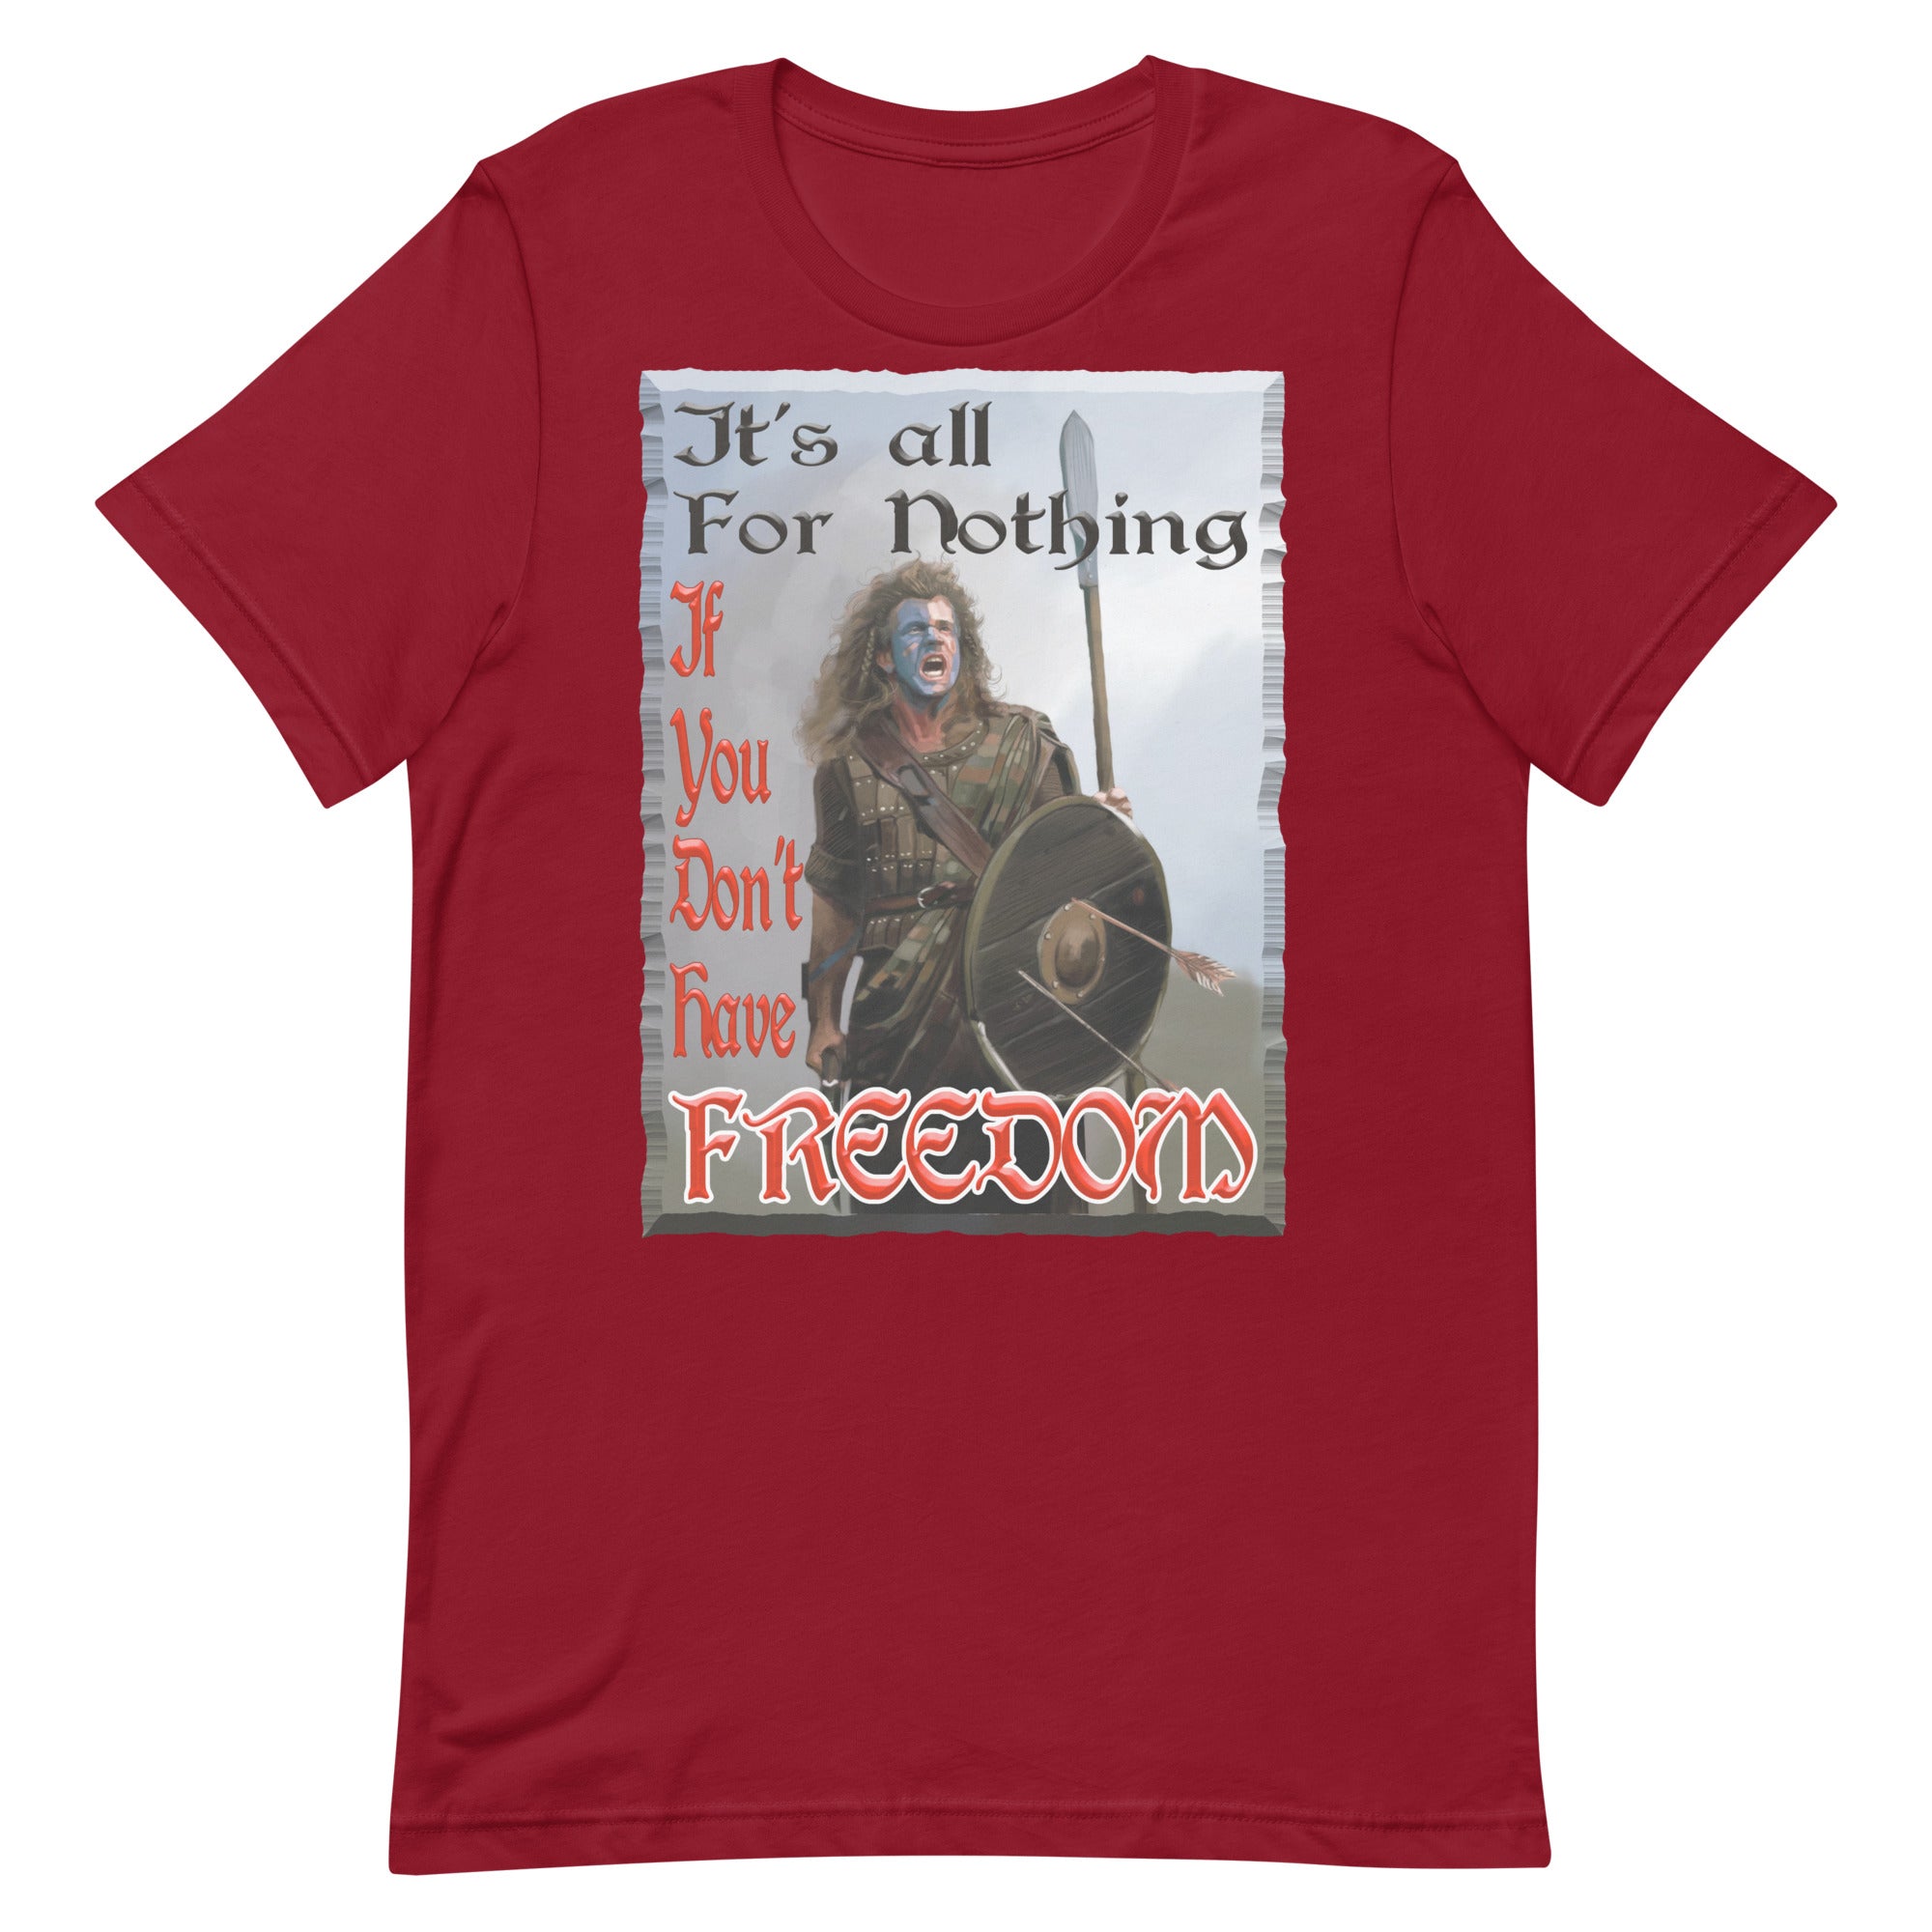 BRAVEHEART  -IT'S ALL FOR NOTHING  -IF YOU DON'T HAVE FREEDOM